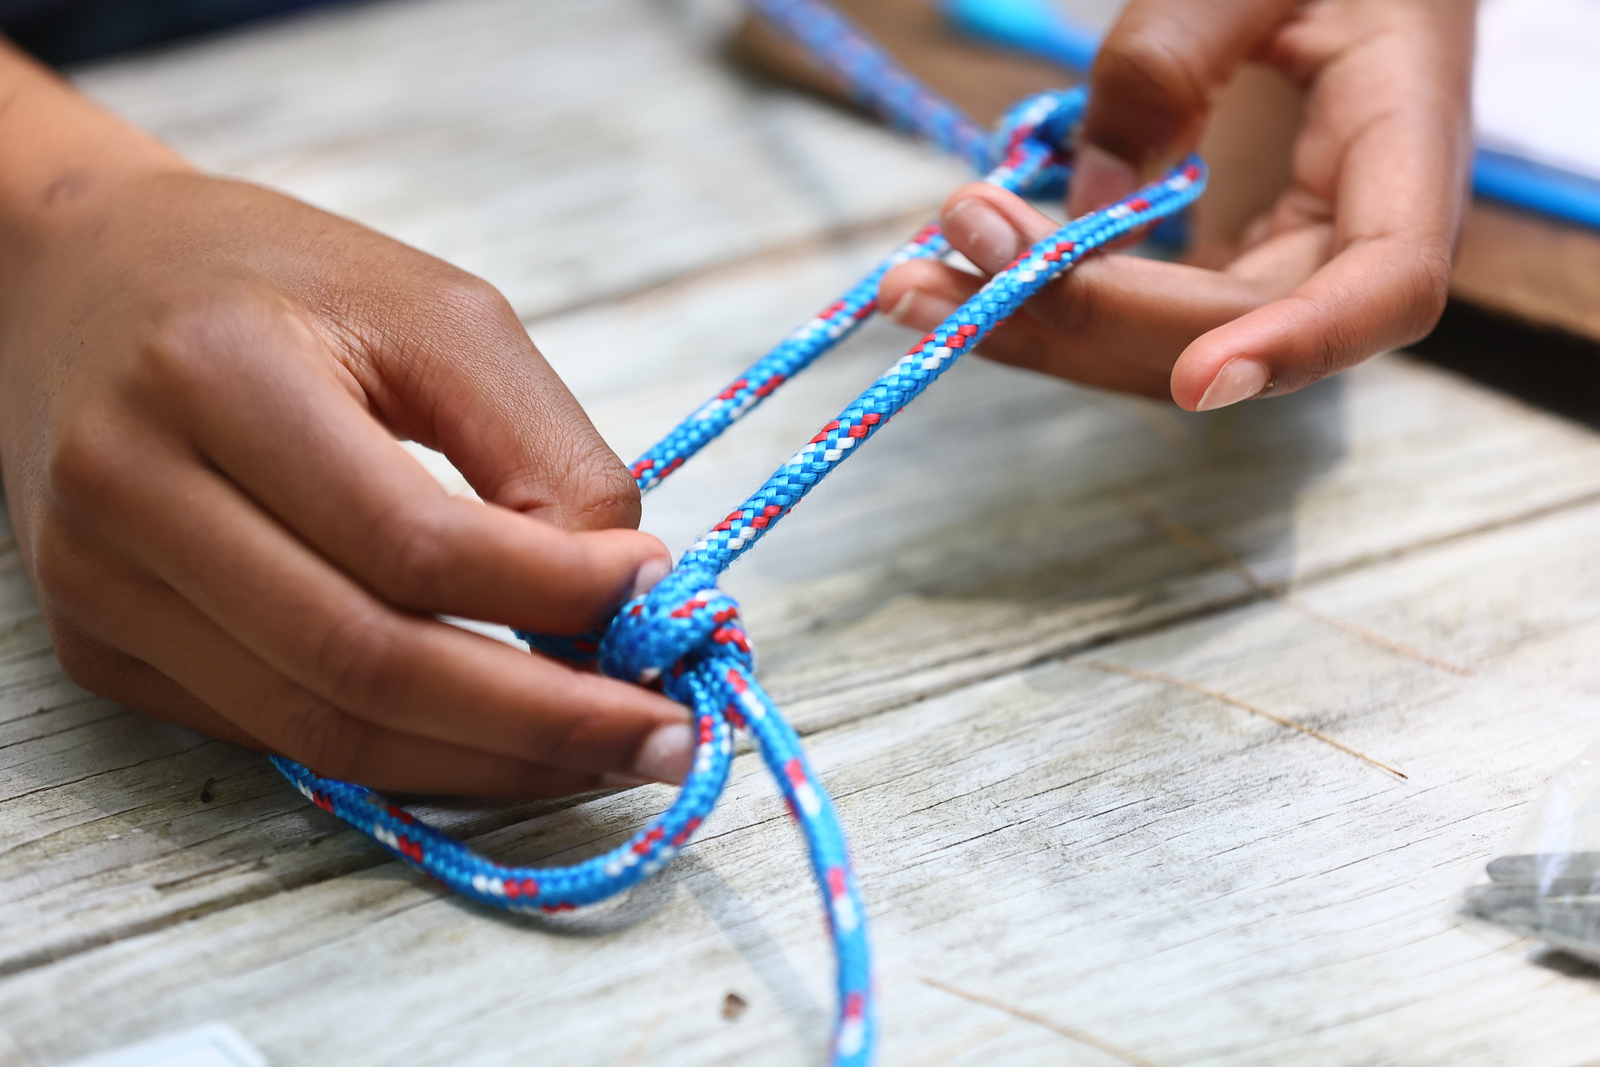 Summer Camp knot tying